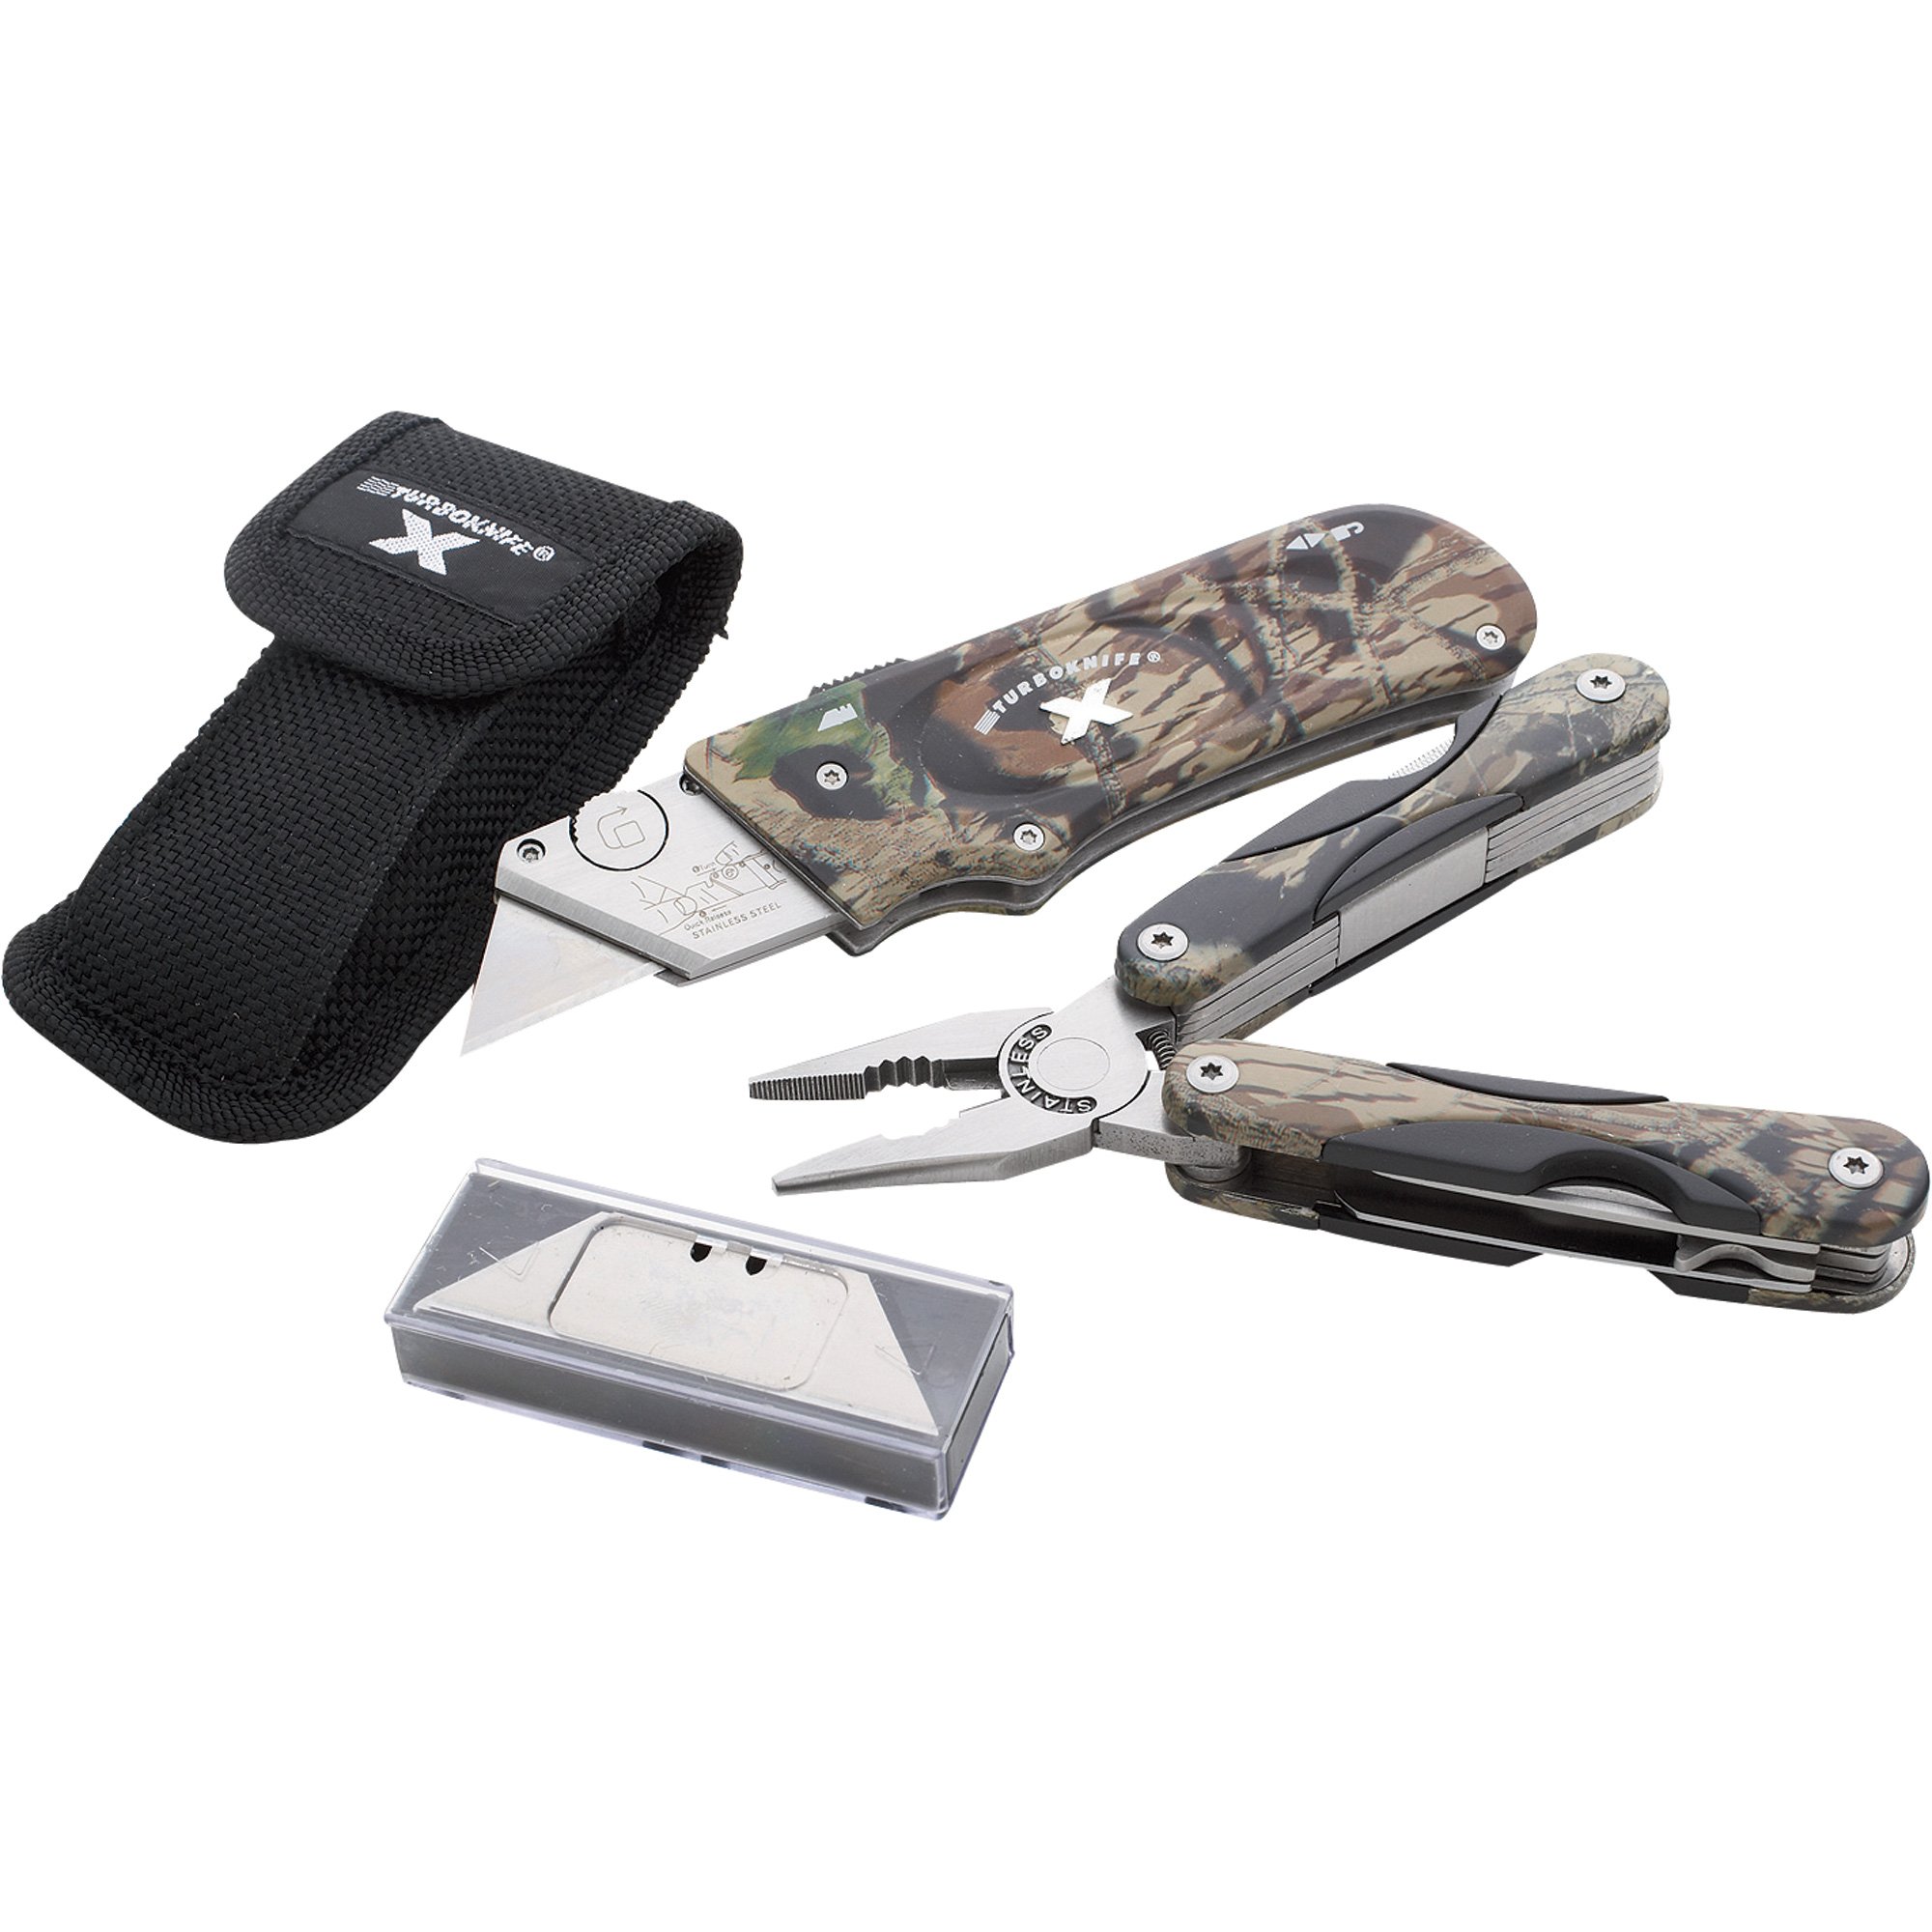 Turboknife X Camo and Multi-Function Pliers, Model# 33-173